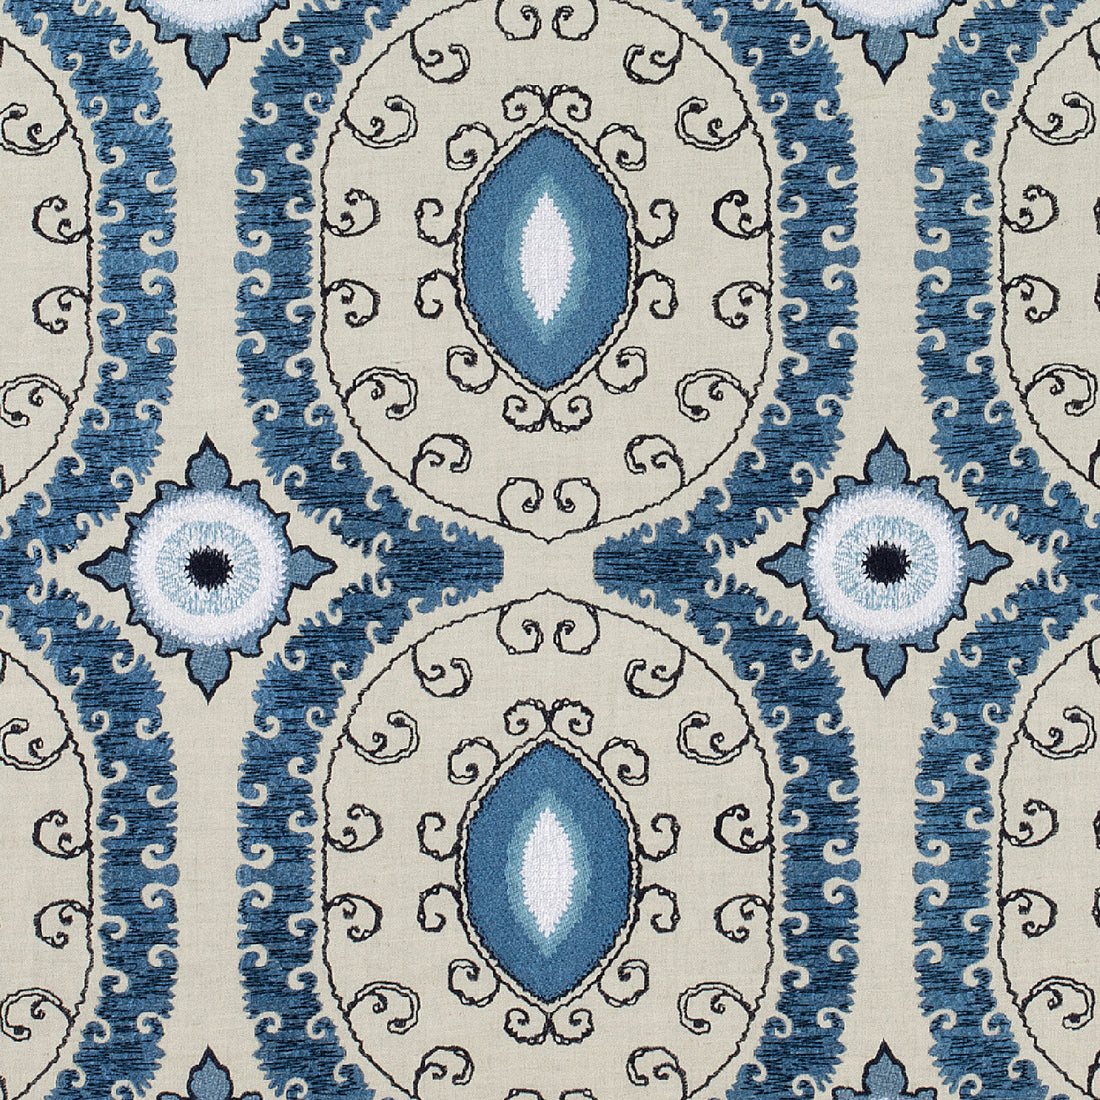 Castile Embroidery fabric in blue color - pattern number AW72975 - by Anna French in the Manor collection